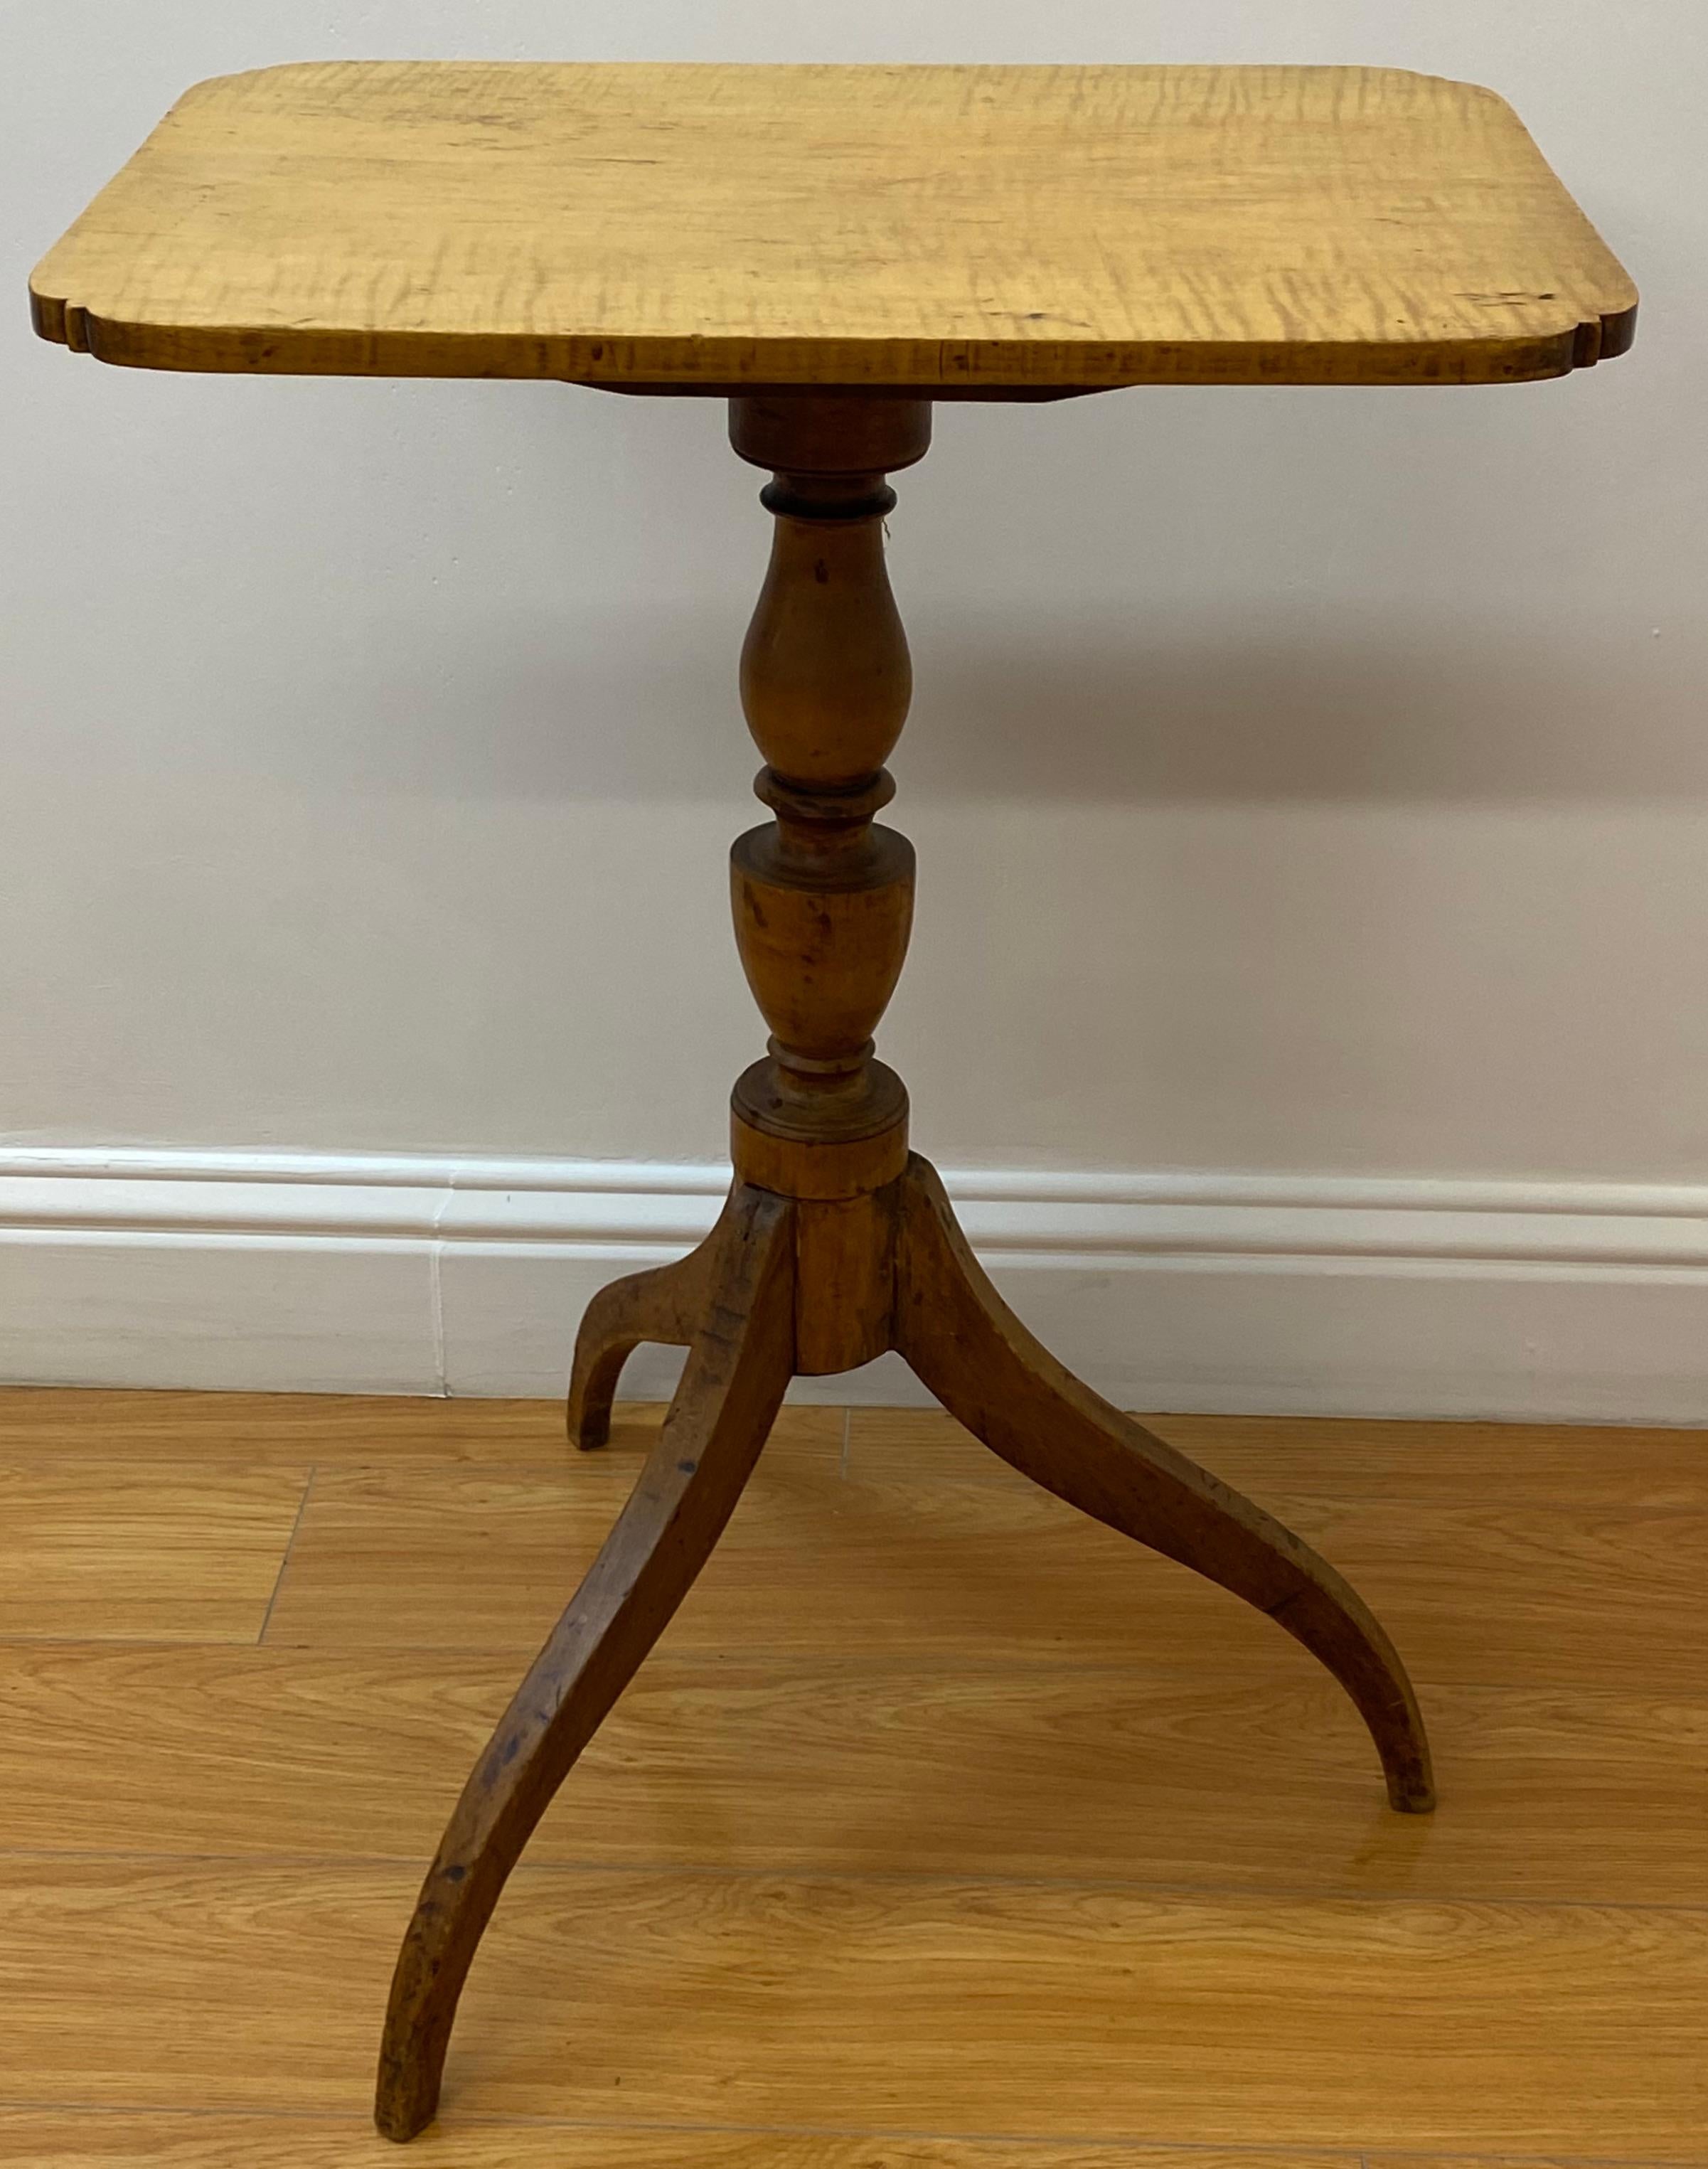 Hand-Carved 18th to 19th Century American Curly Maple Tilt Top Candlestick Table For Sale